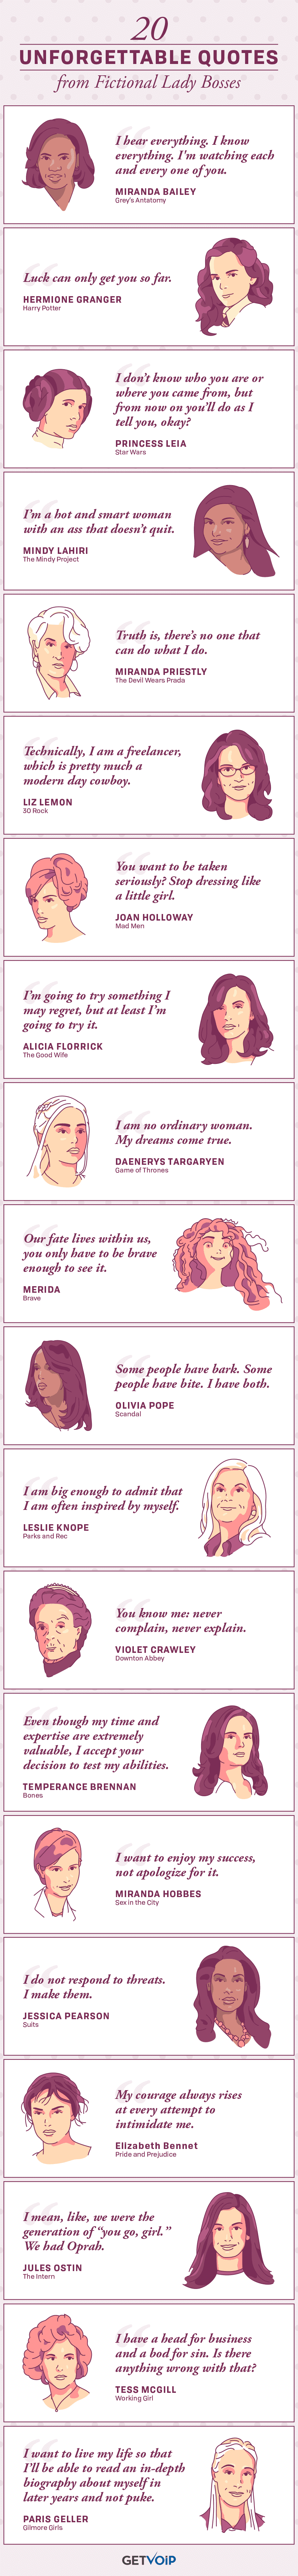 Quotes from fictional lady bosses infographic